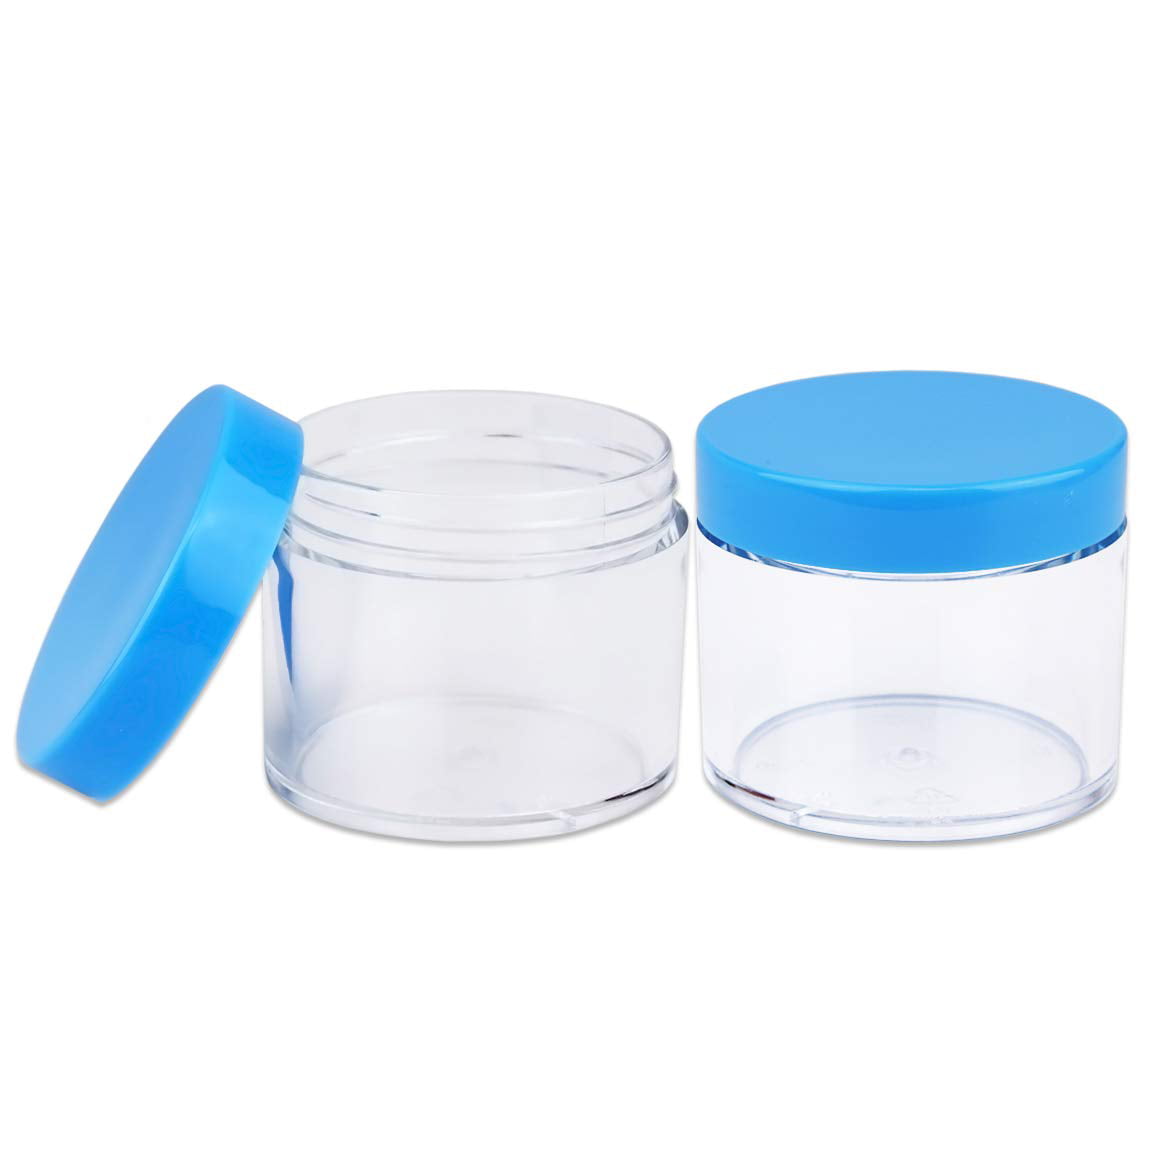 5ml/5g Small Containers With Lids - 35Pcs Plastic Jars With Lids (Blue) - Small  Plastic Containers With